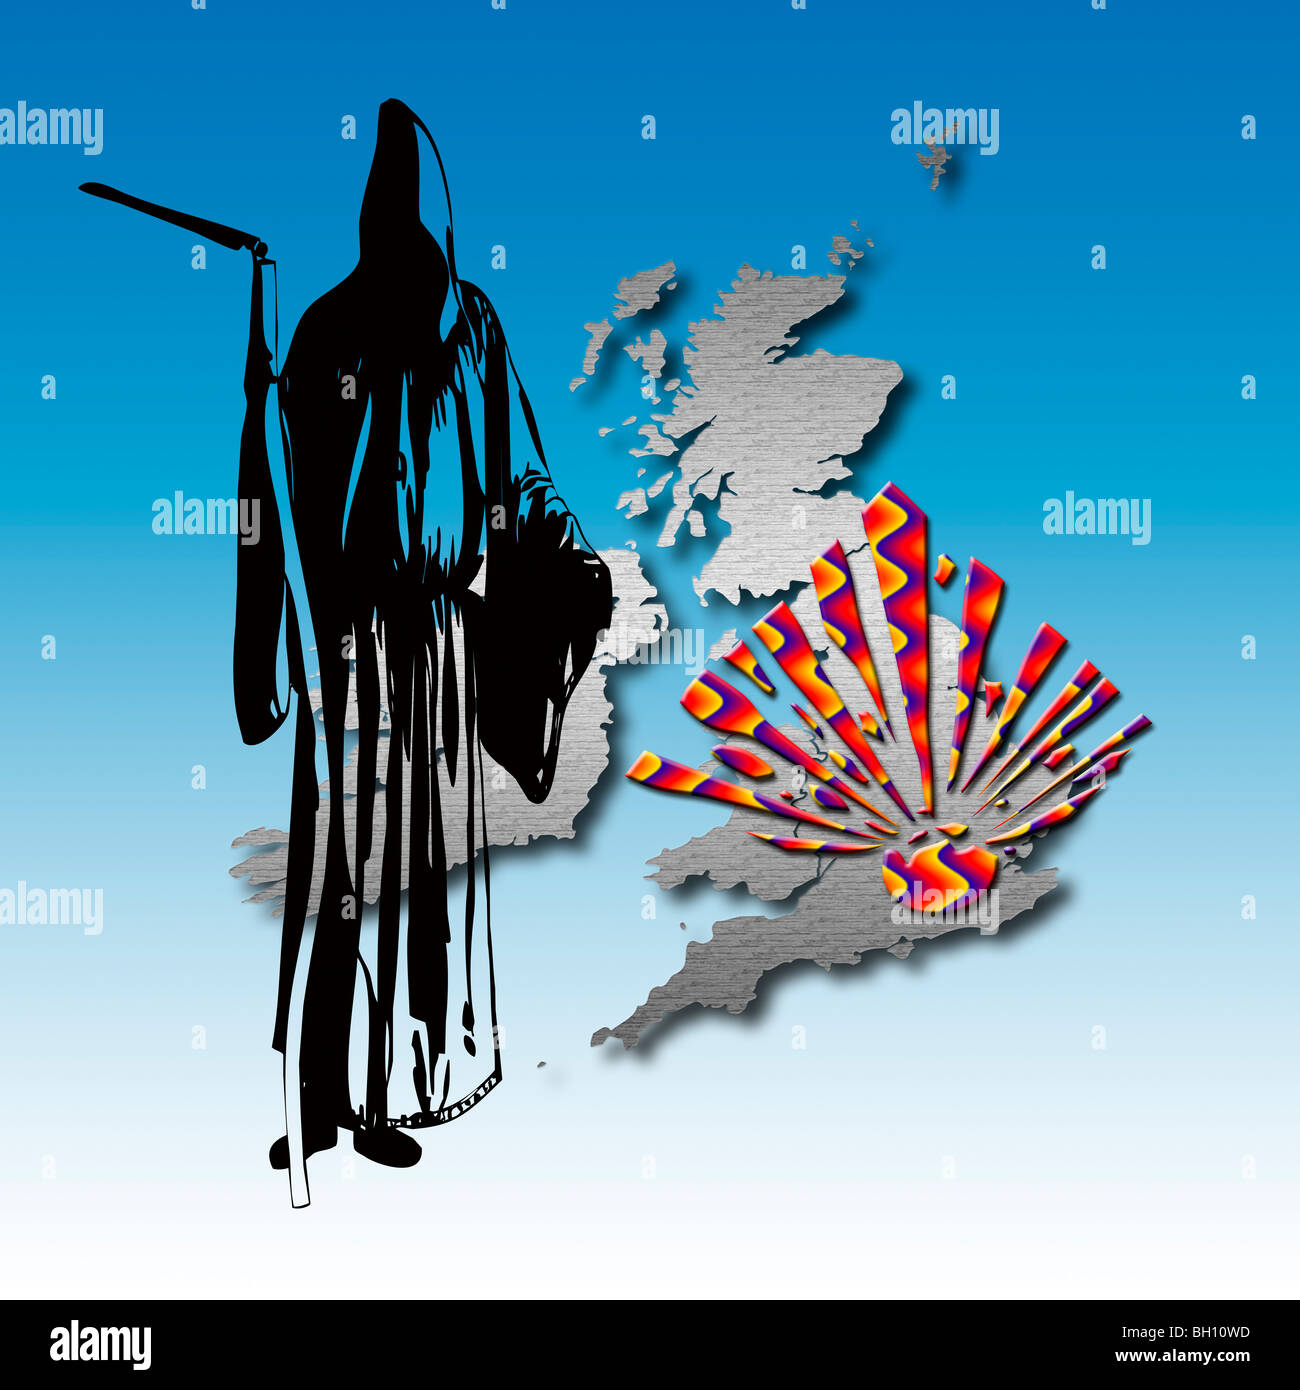 Grim Reaper! Graphical representation of a Black Silhouette of the Grim Reaper standing over an exploding United Kingdom Stock Photo